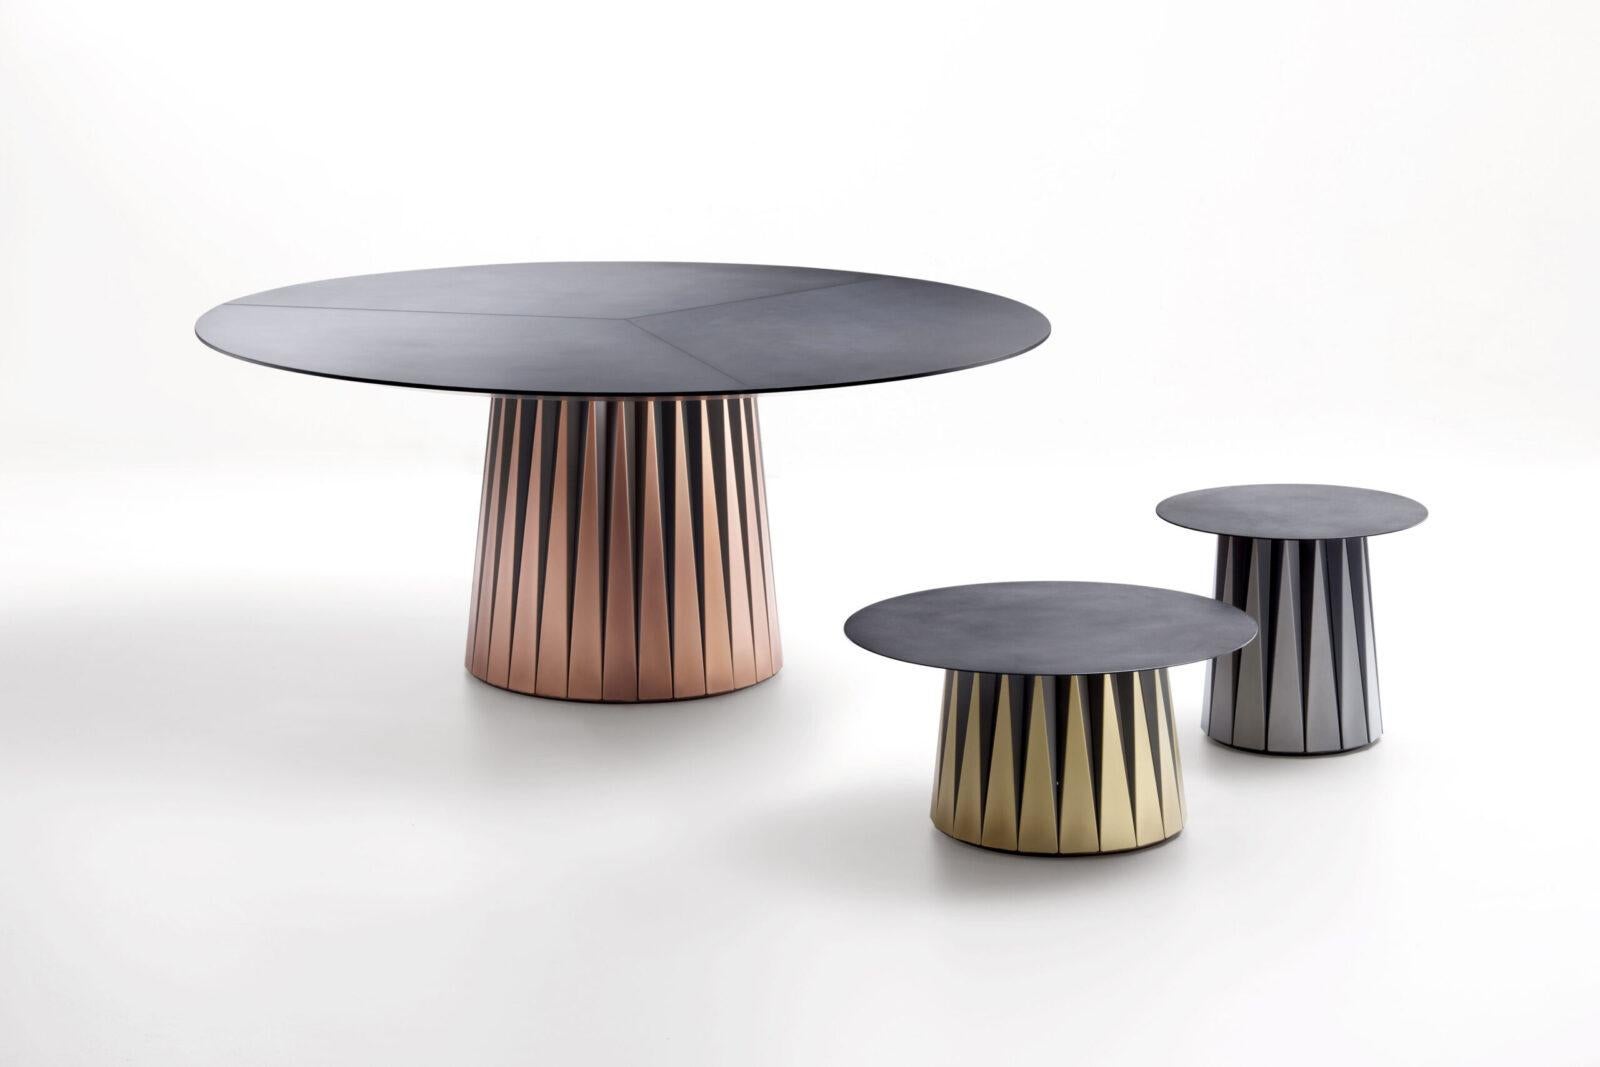 Inspired by the art of origami, the Coste table collection is an ode to the technique of folding metal. The conical trunk at the centre is composed of the juxtaposition inherent to a folded module, whose 'ribbing’ generates a series of isosceles